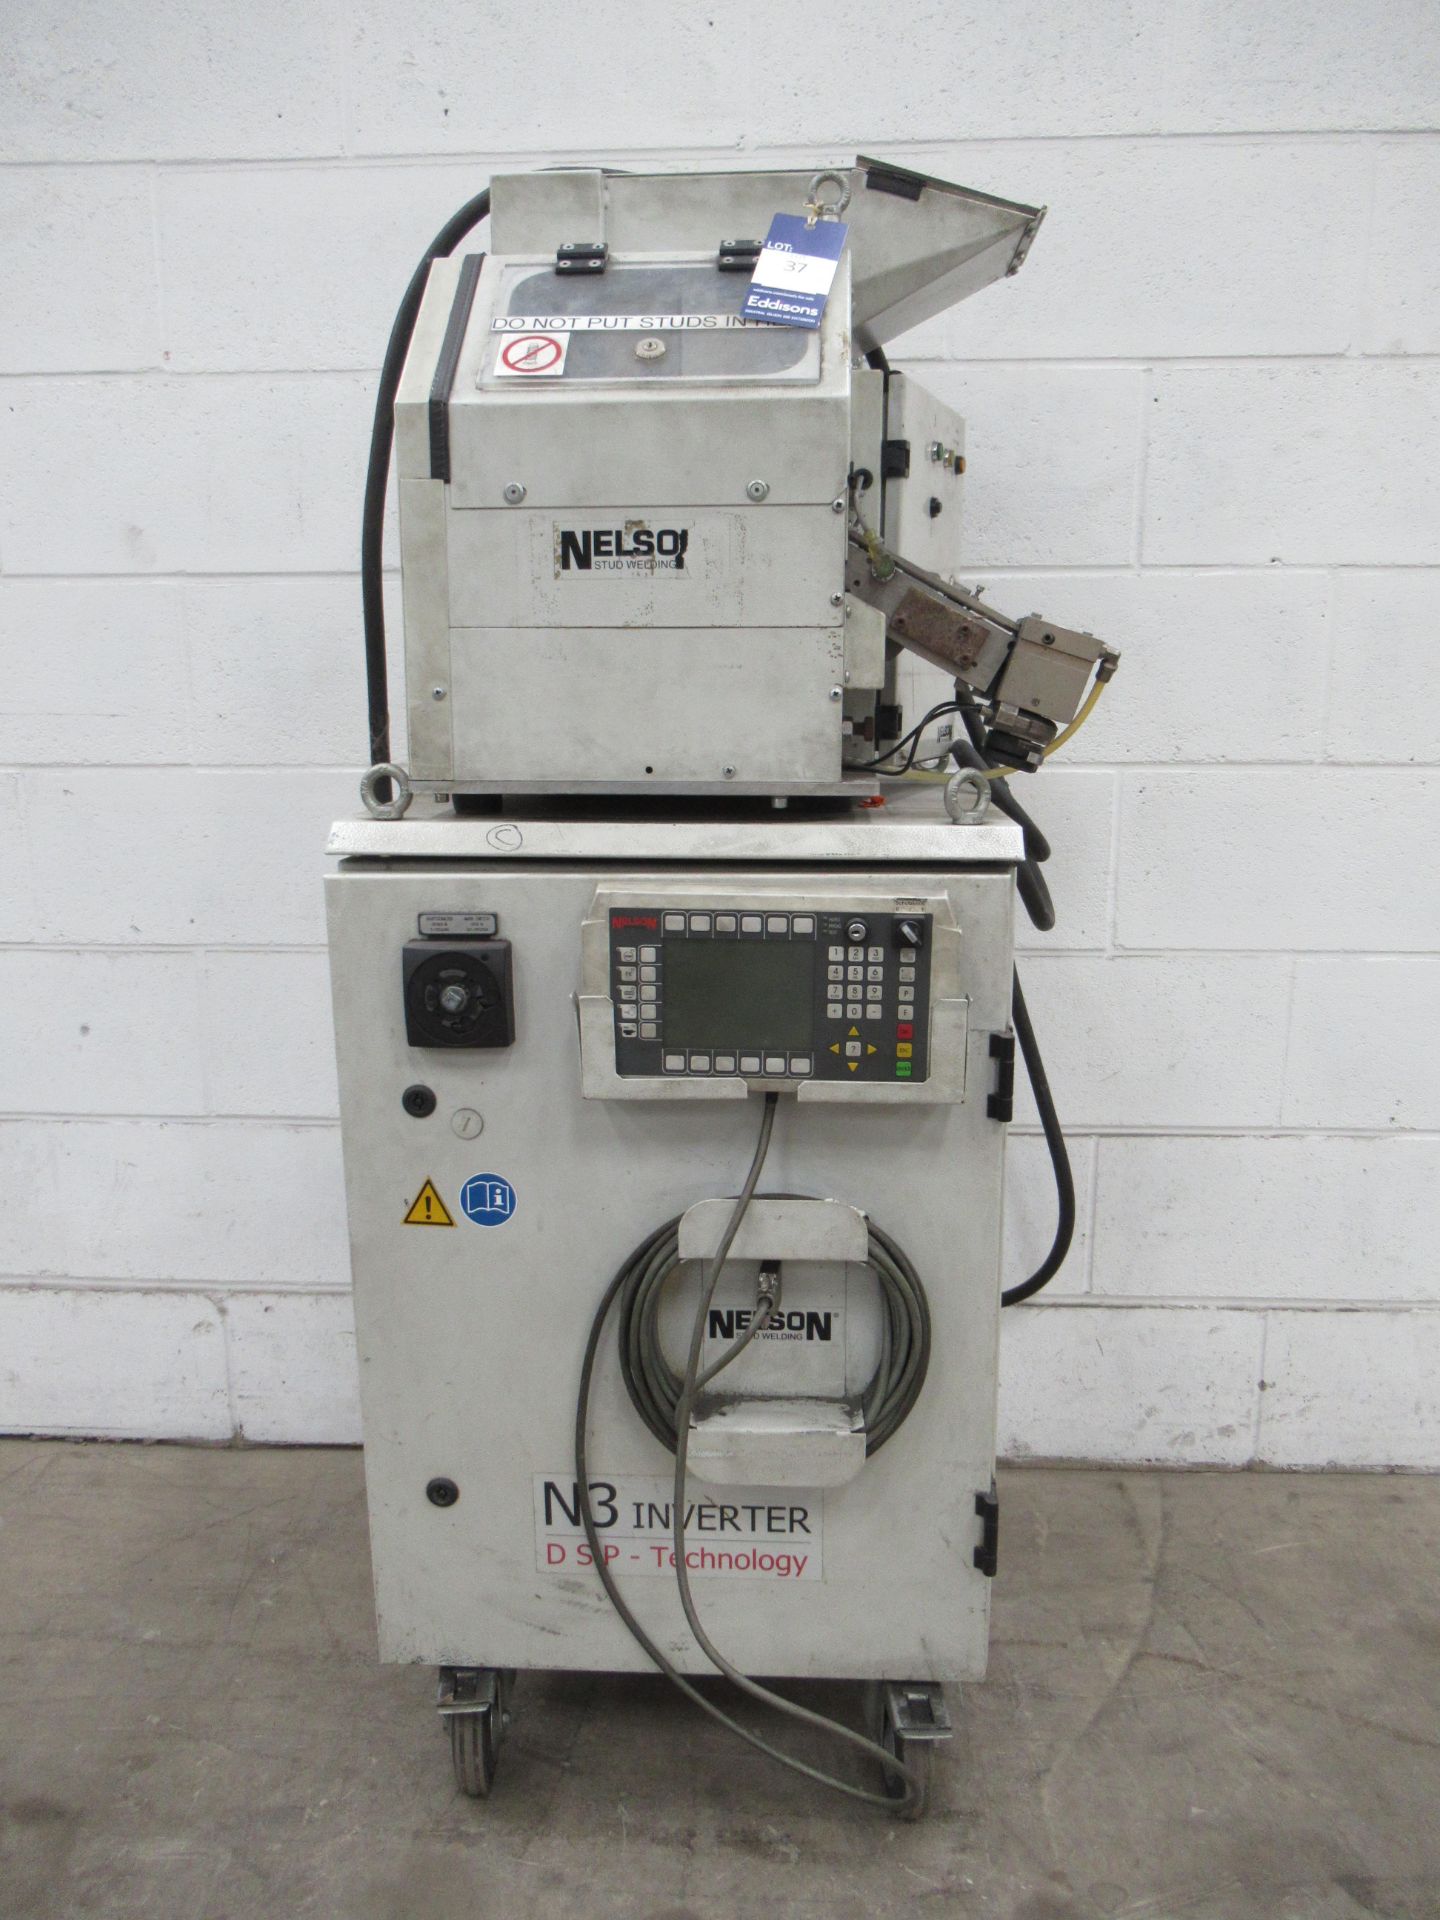 Nelson N3 inverter DSP technology stud welder with Nelson FSE100 CND Nelson remote control stud weld